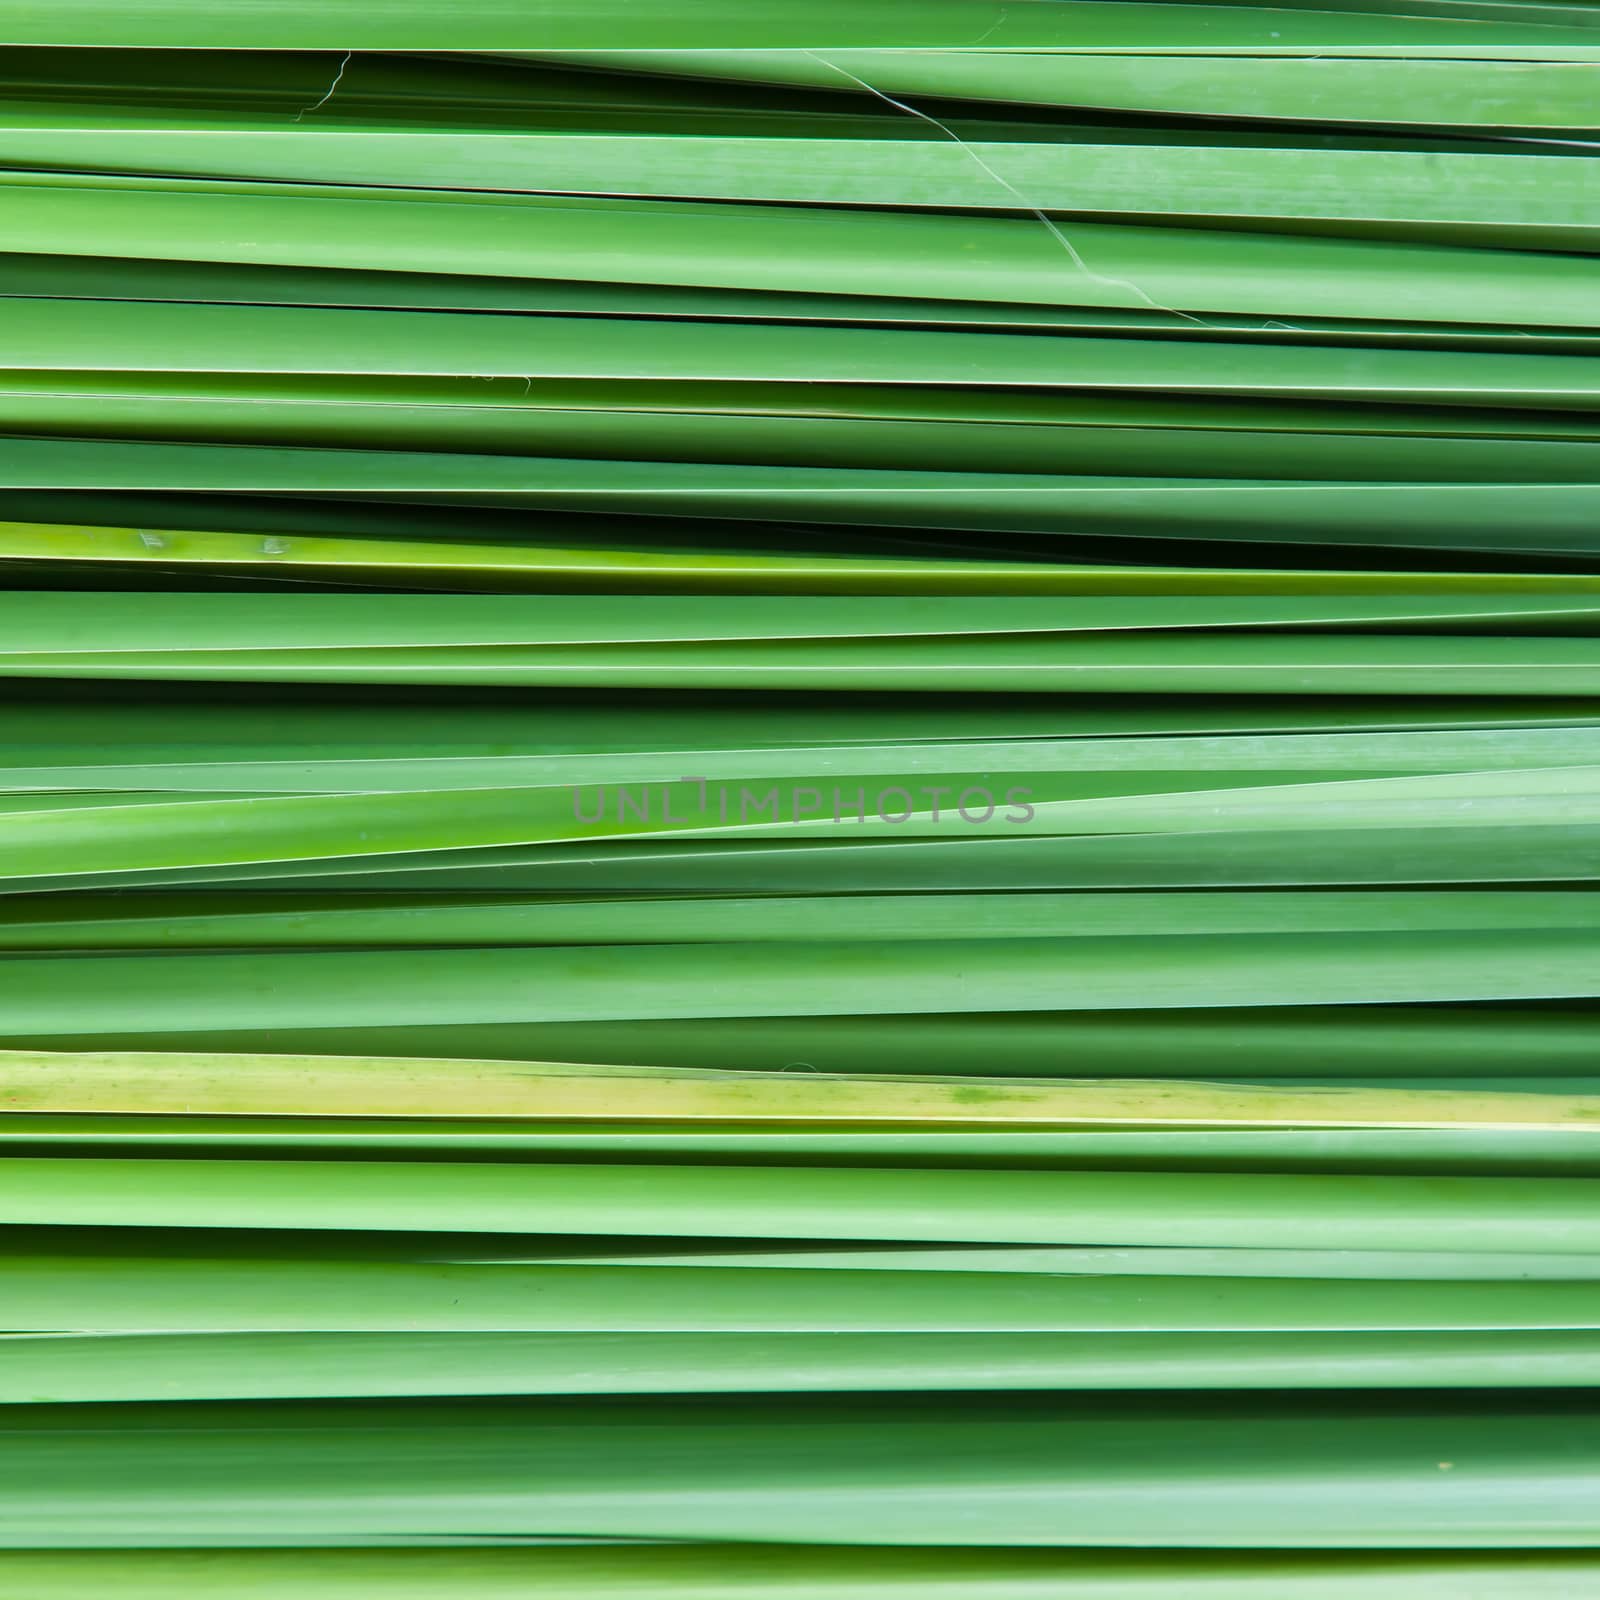 Backdrop of the grass leaves. Leaves of grass lined.